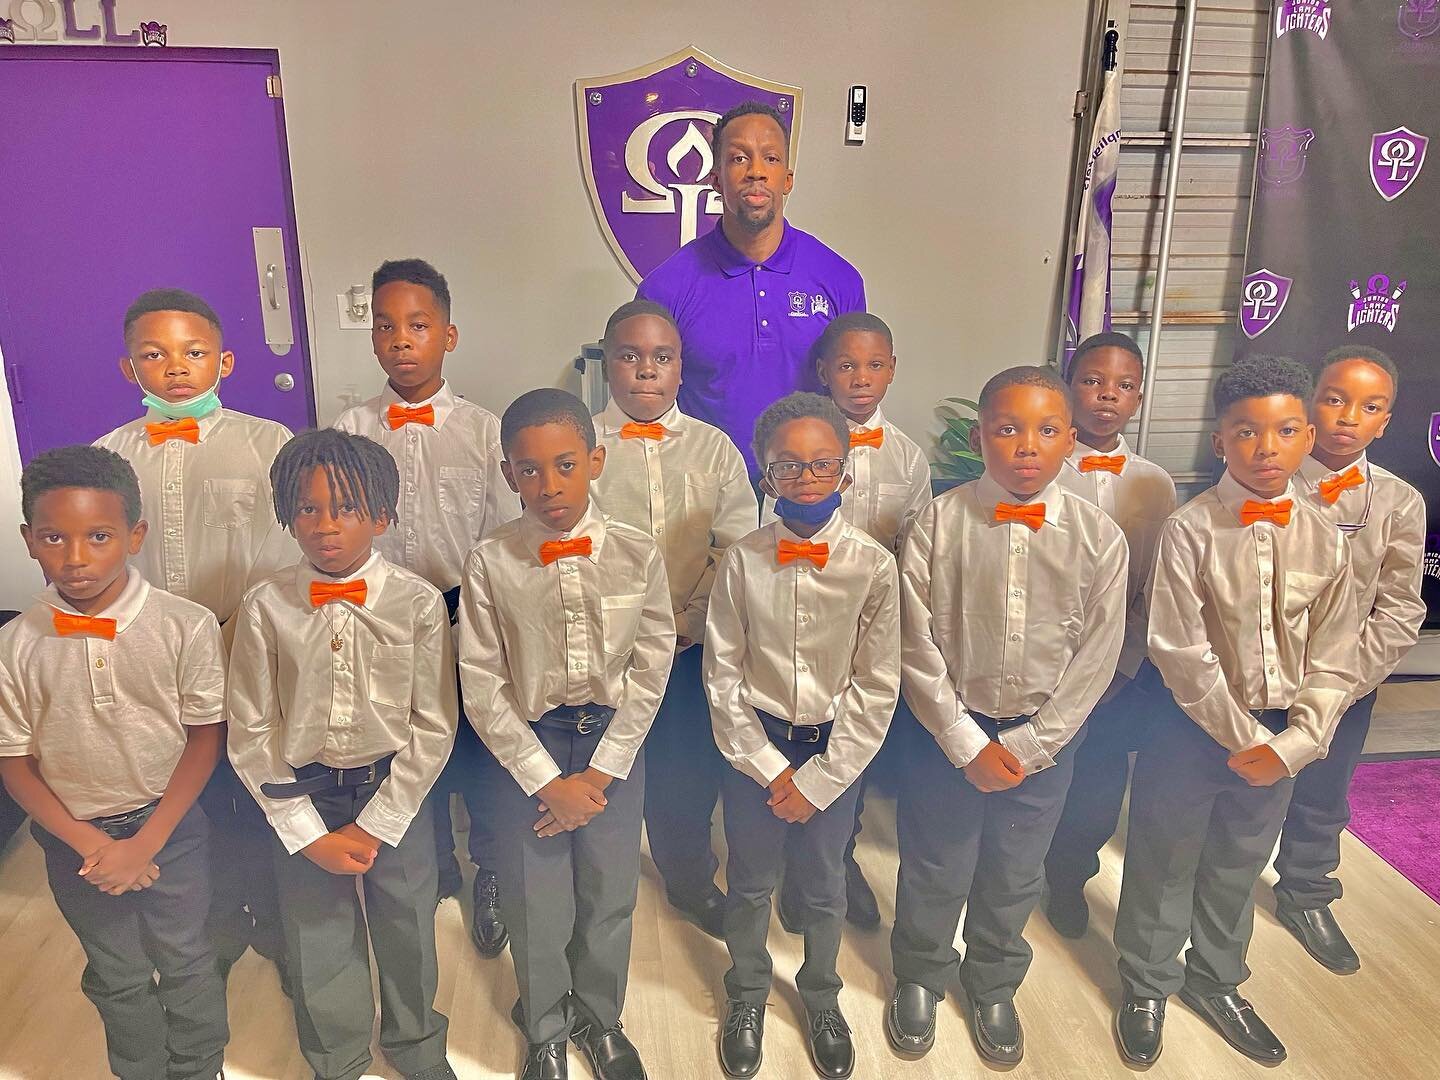 Where it all started&hellip; rewind to the first workshop back in #May. #weLeadTheWay #OmegaLamplighters #JuniorLamplighters #LITLamplighters #CrownsOnly👑💜 #Light⚡️Team #DaVillage #LLL